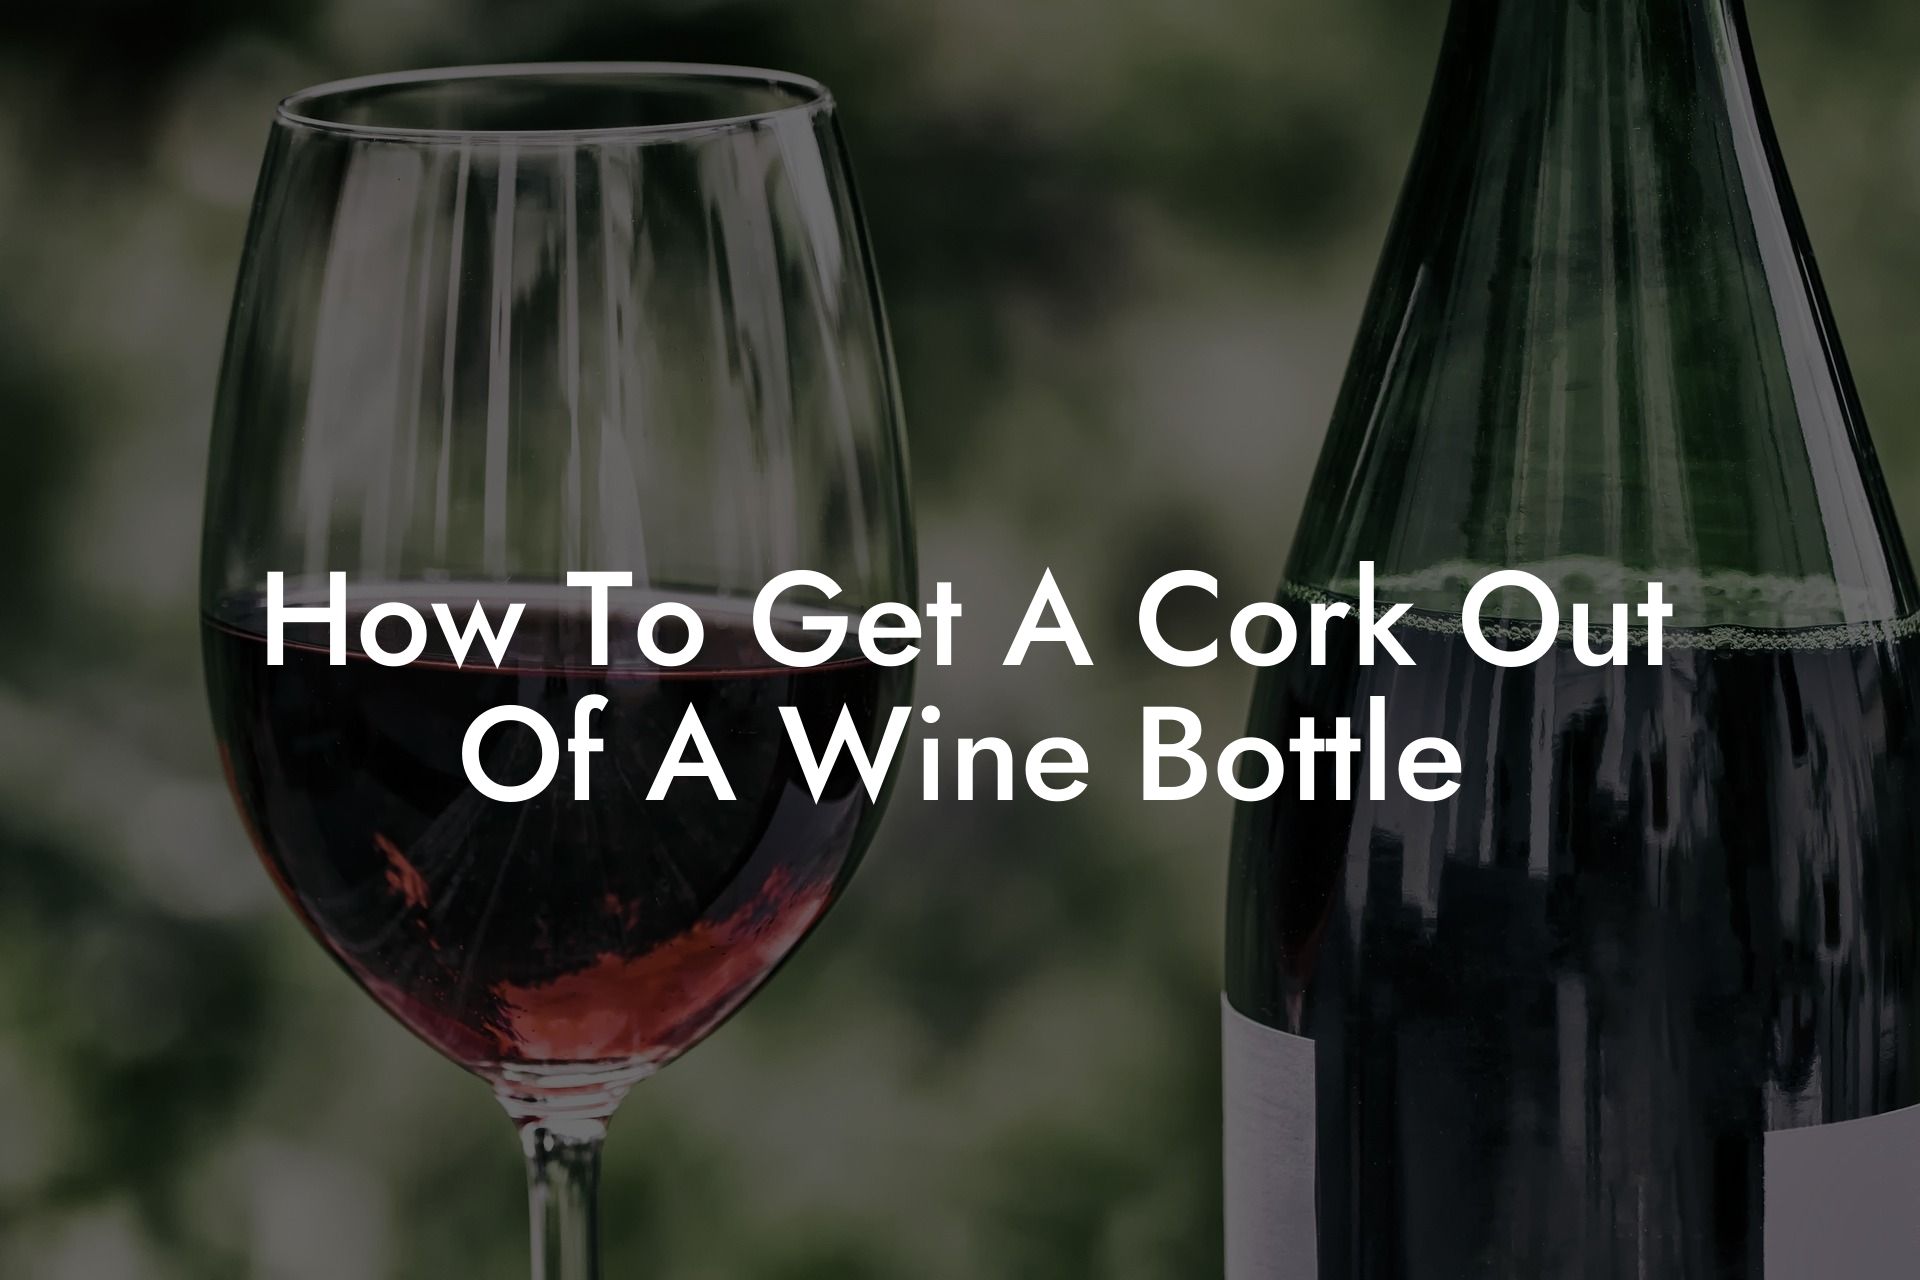 How To Get A Cork Out Of A Wine Bottle